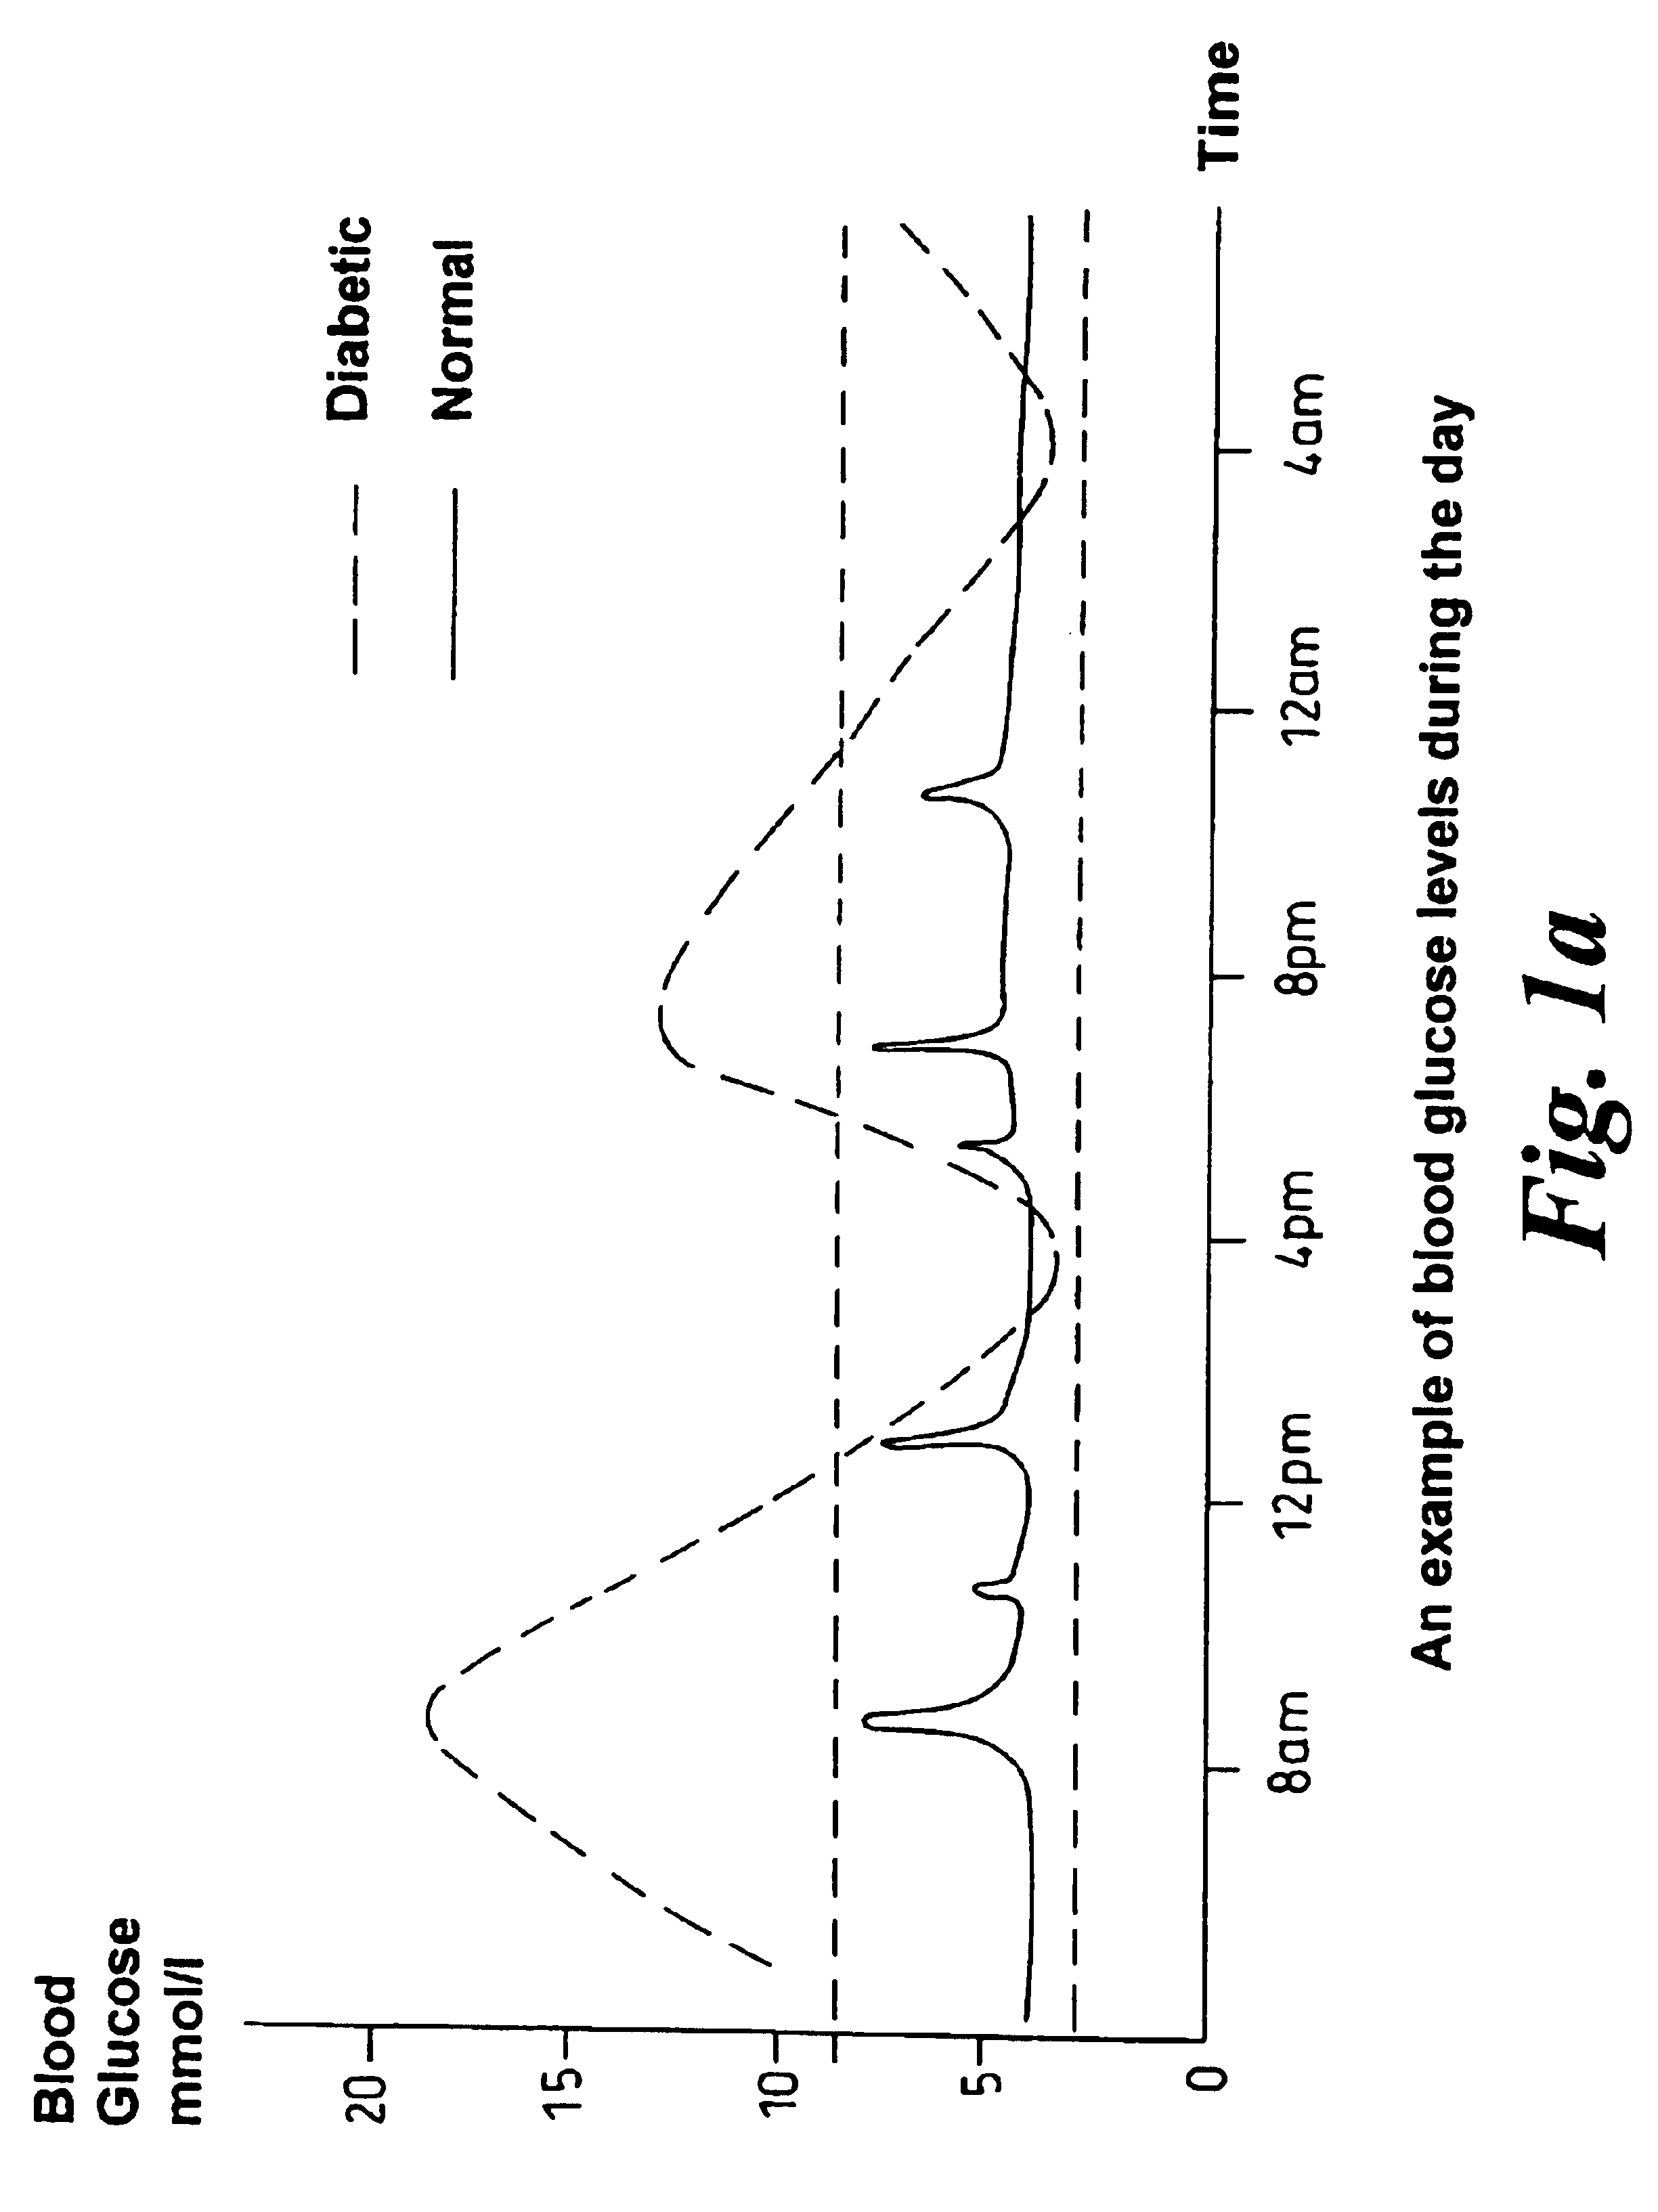 Apparatus for measurement of blood analytes